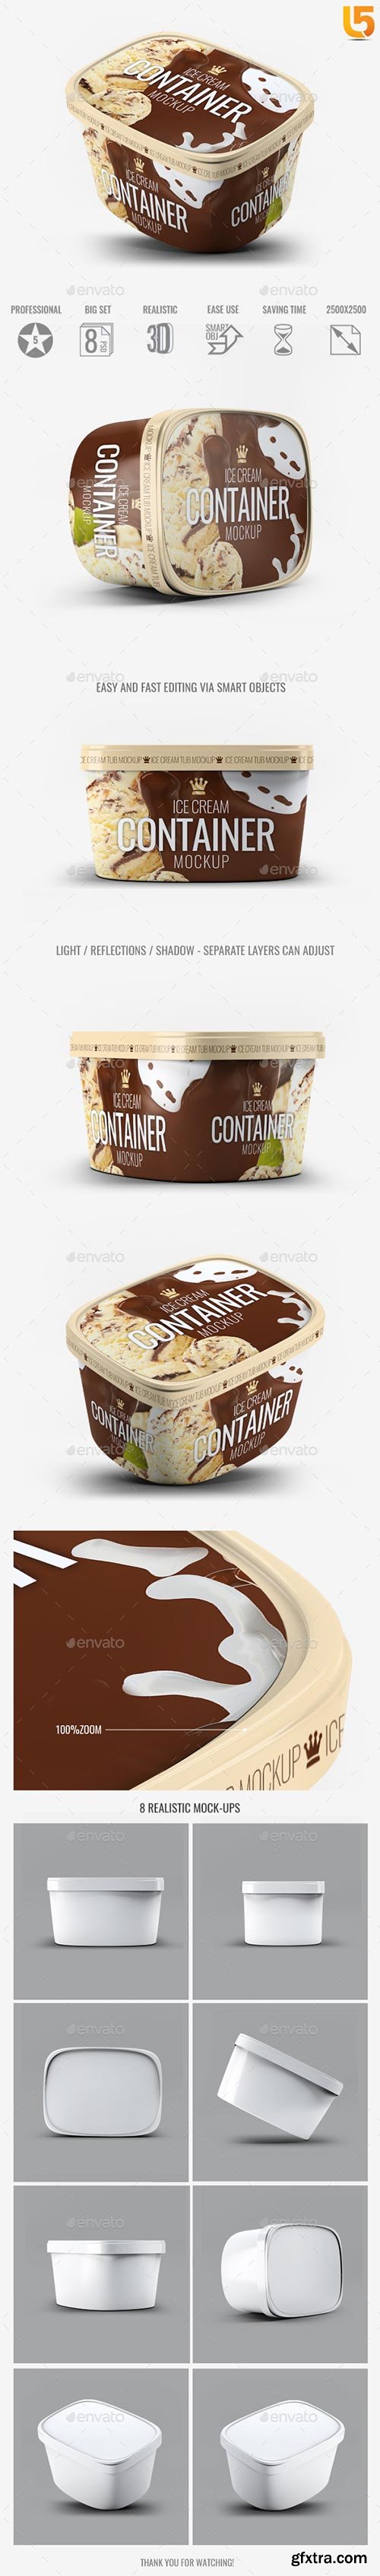 Graphicriver - Ice Cream Container Mock-Up 20413057